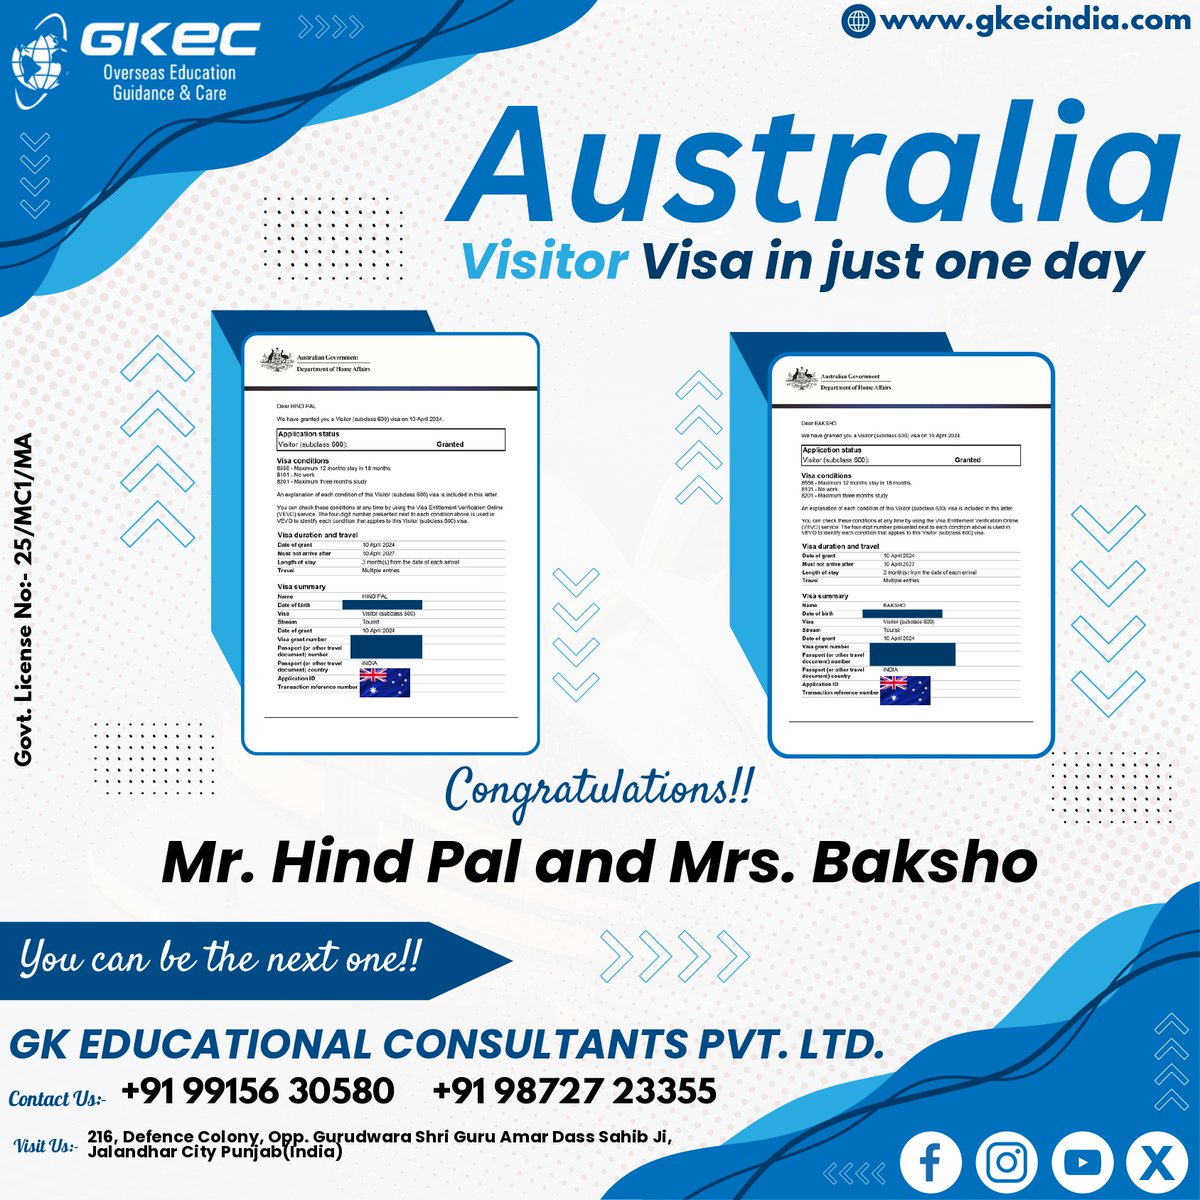 Congrats to Hind Pal & Baksho on their Australia Visitor Visas! You could be next! Don't miss out! Contact us now #LiveAfterDeath #UPSC #zerodha #RanveerSingh #SalmankhanHouseFiring #nifty50 #BlackRock #ModiInterview #IStandwithRavindraSinghBhati #Kannappa #आएगा_तो_भाटी_ही